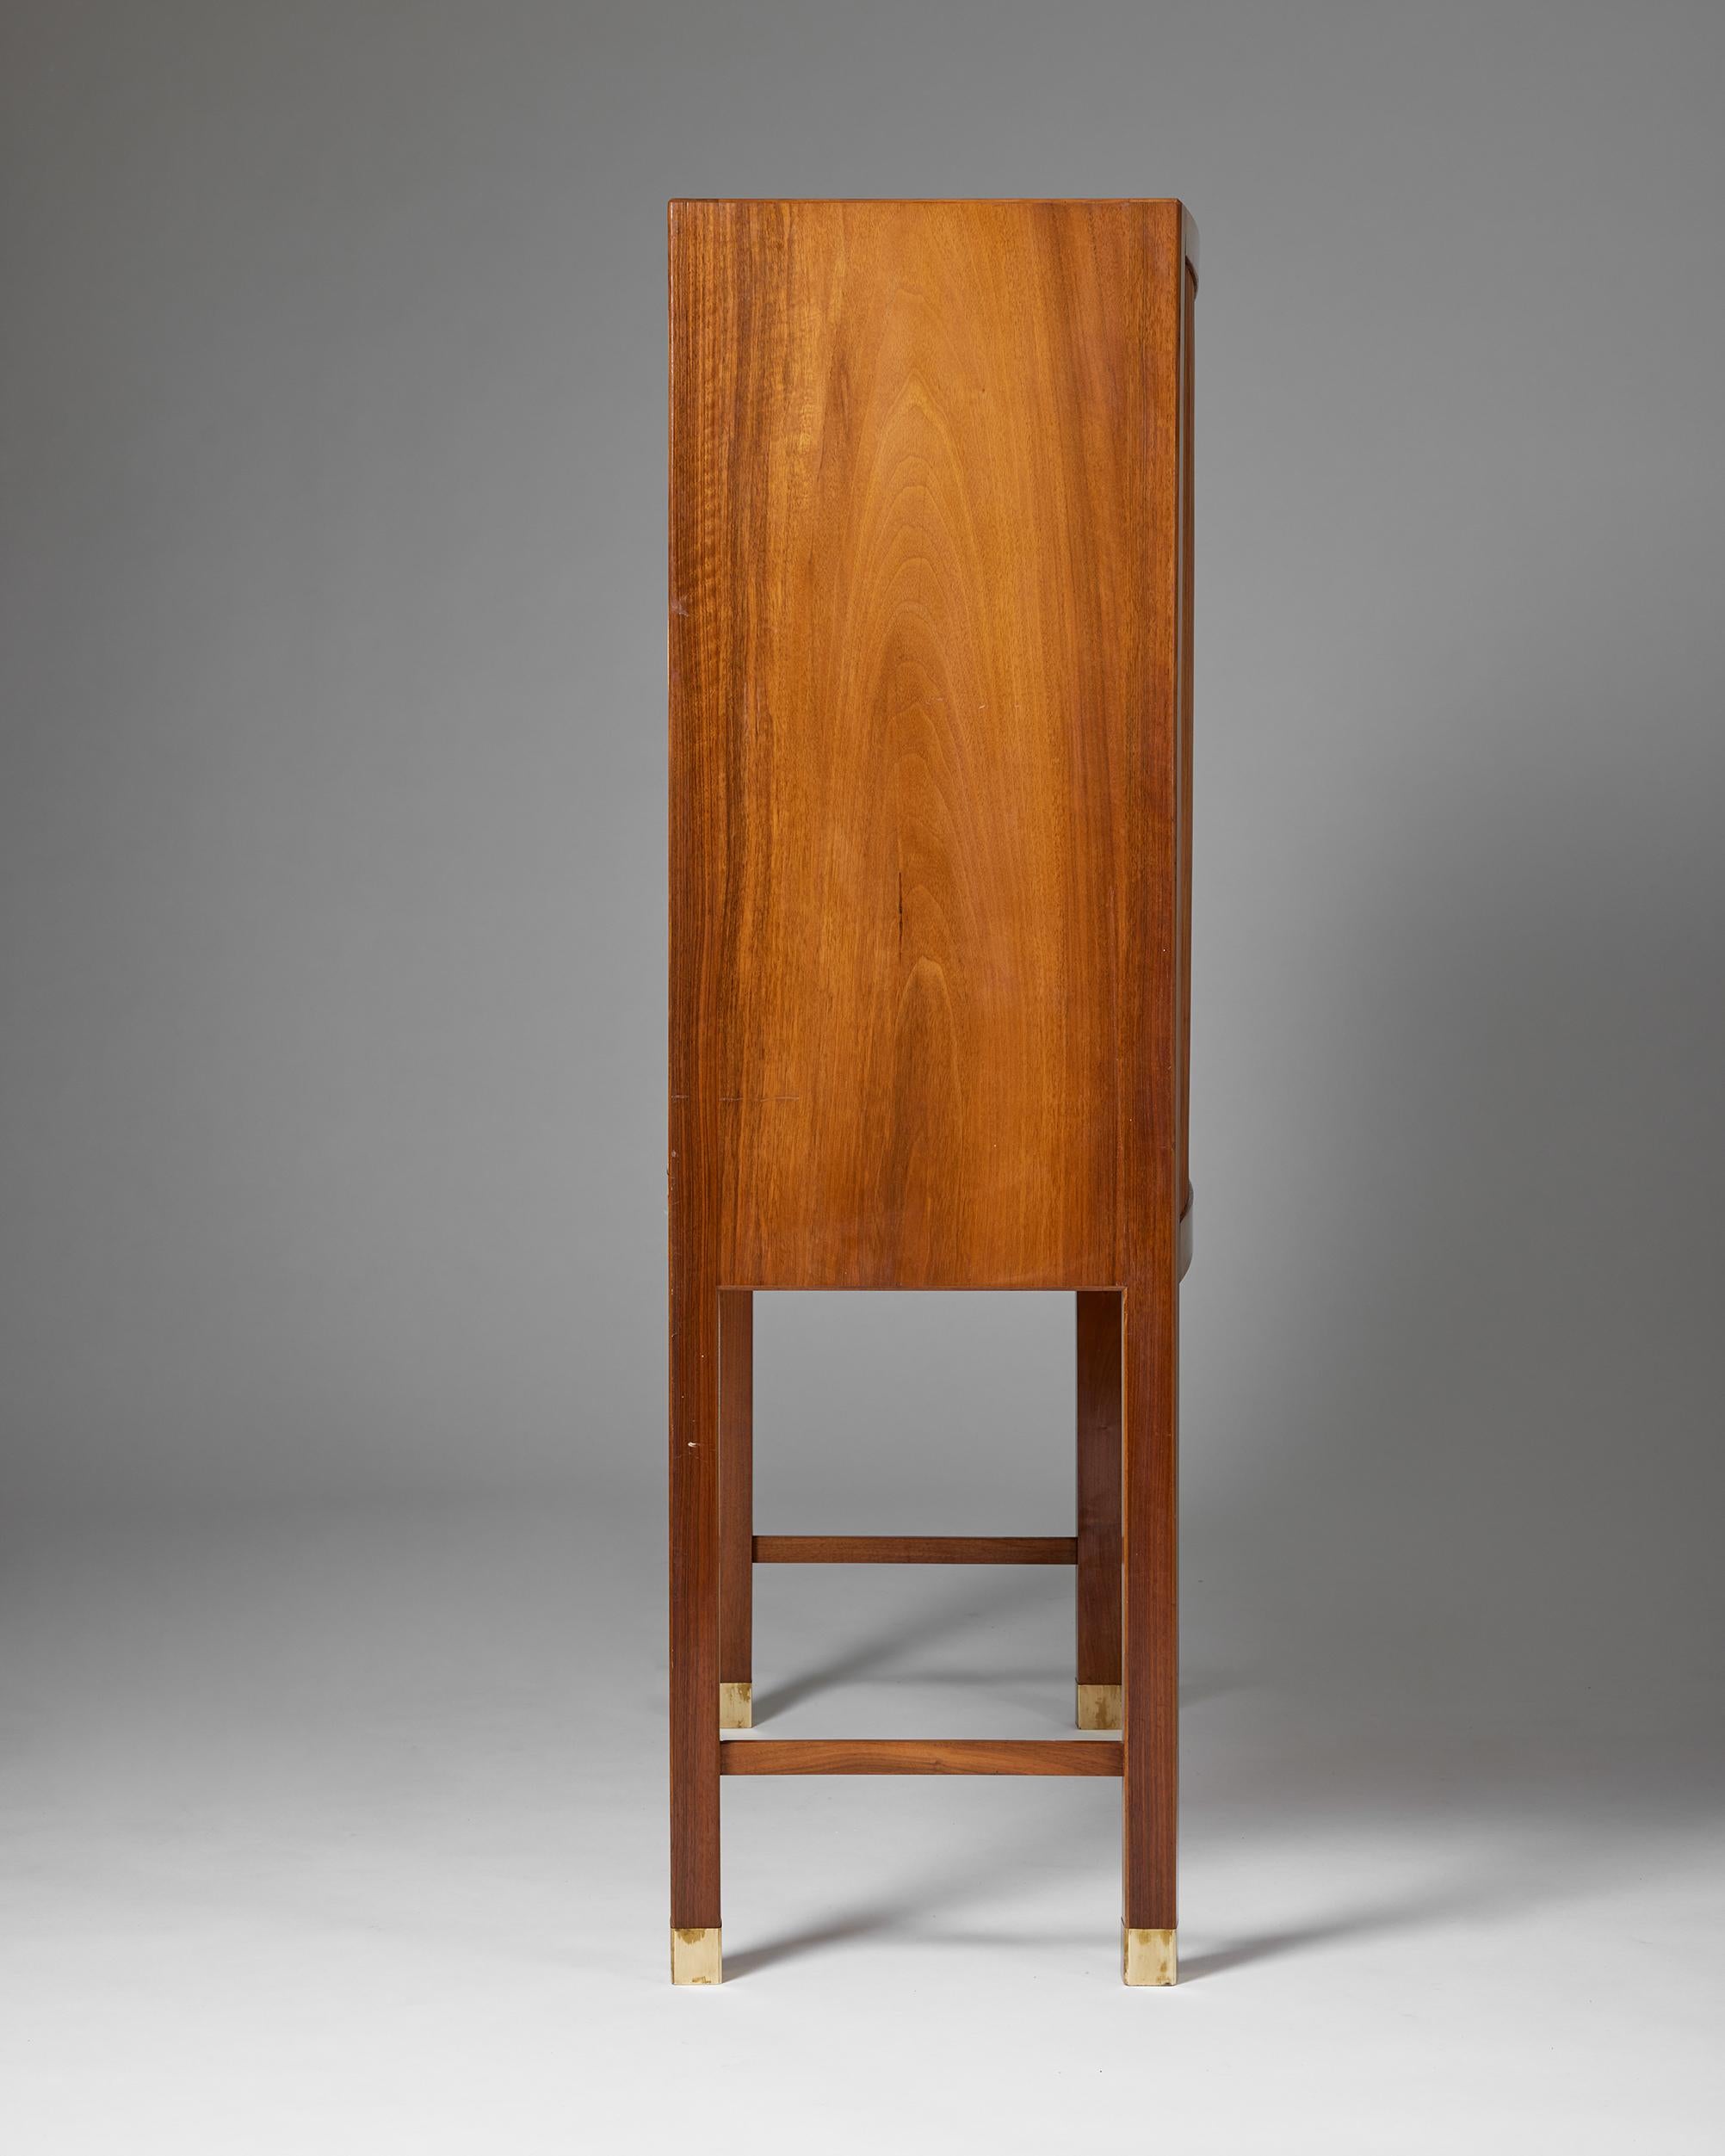 Cabinet with Tambour Doors Designed by a Danish Cabinetmaker, Denmark, 1950s For Sale 1